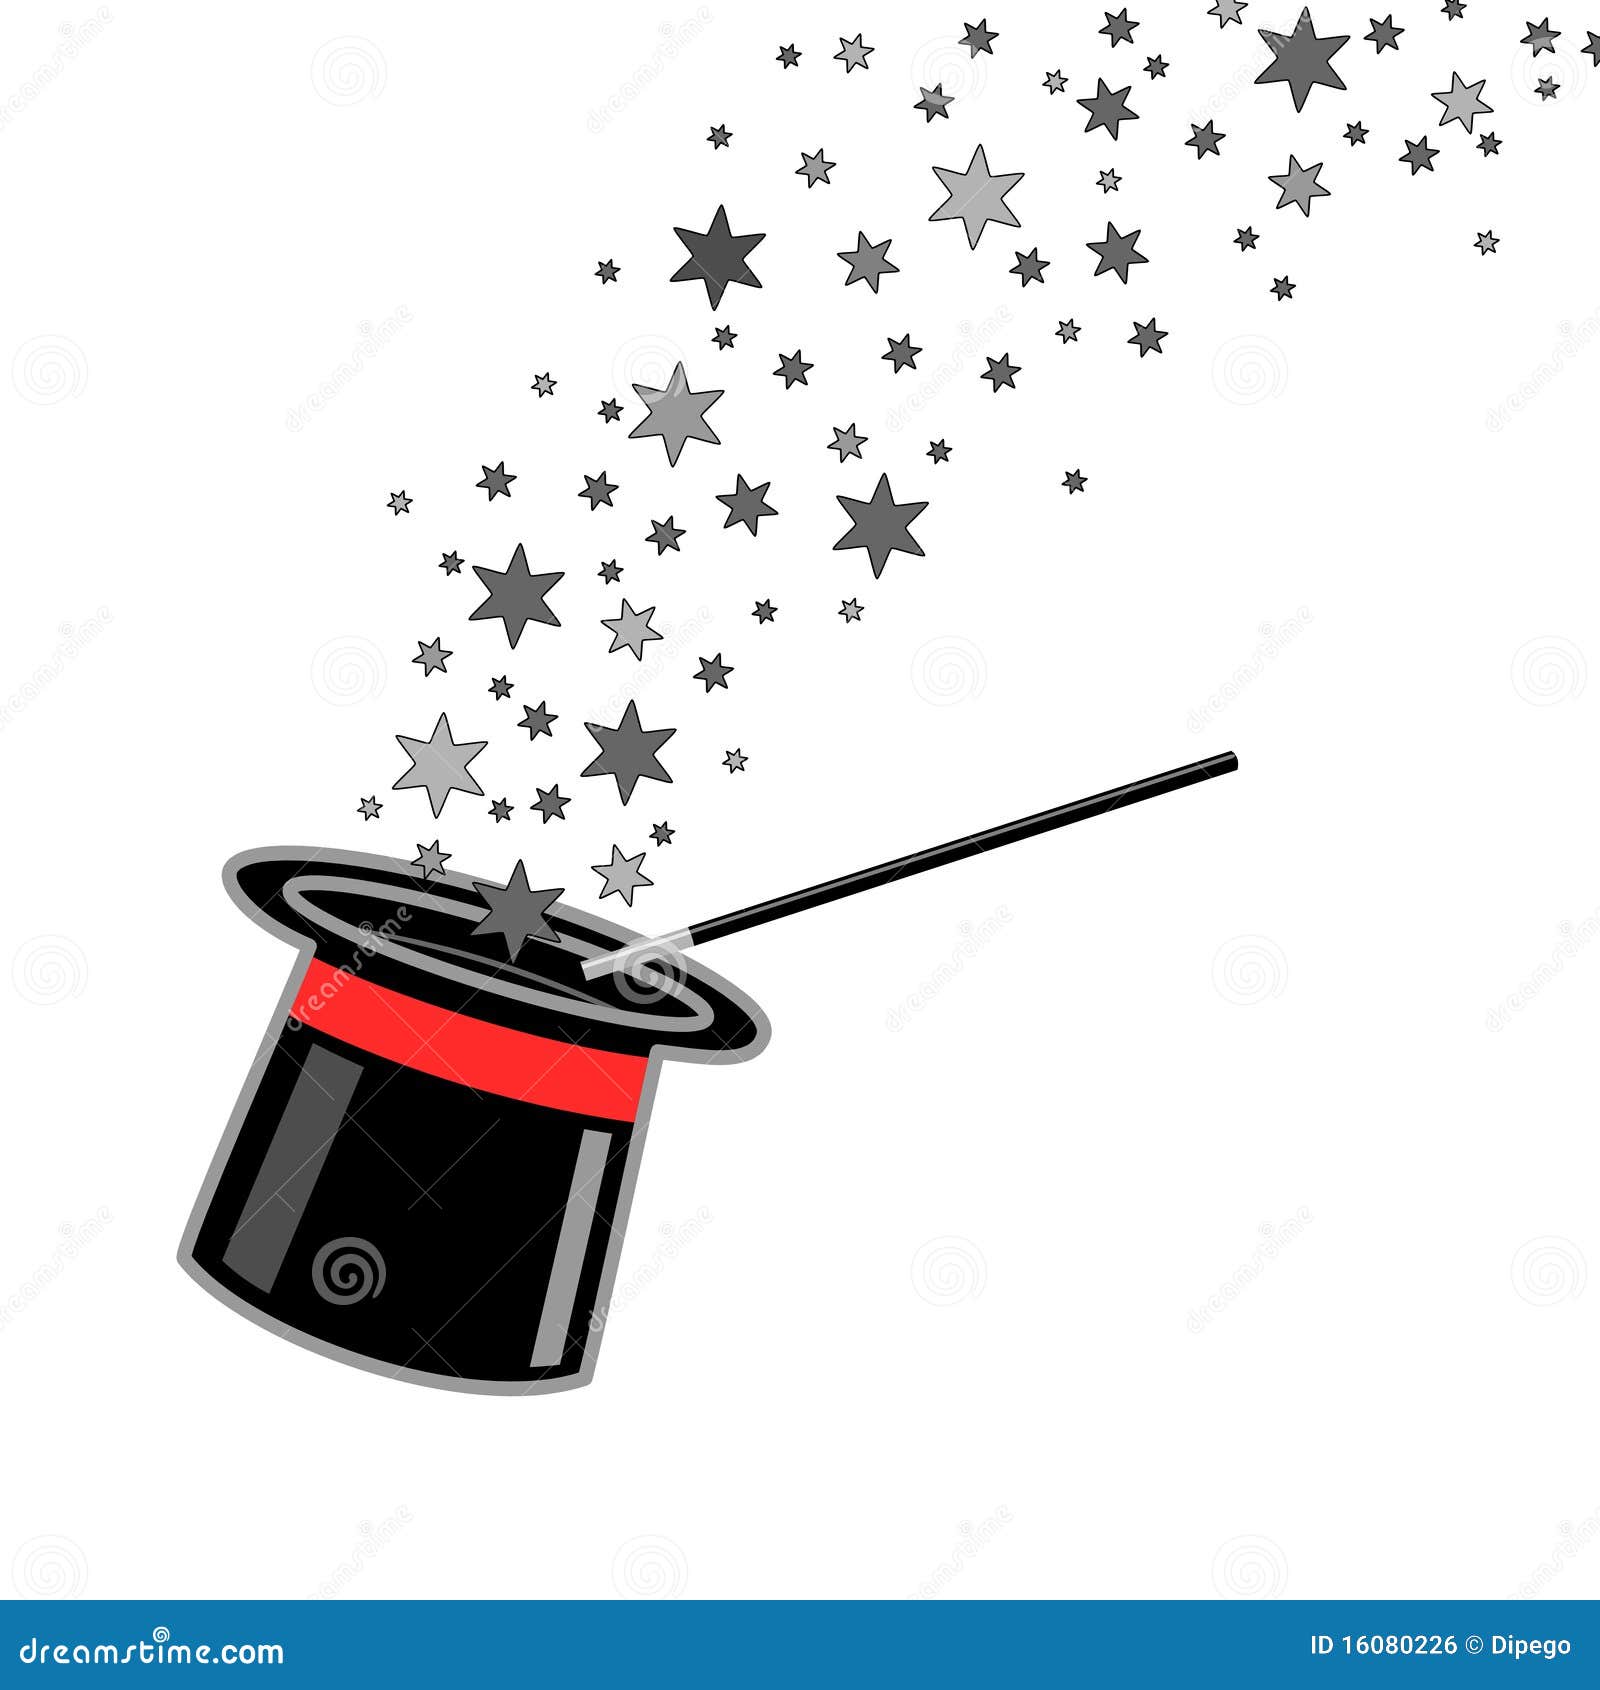 free clipart magic hat and wand - photo #41